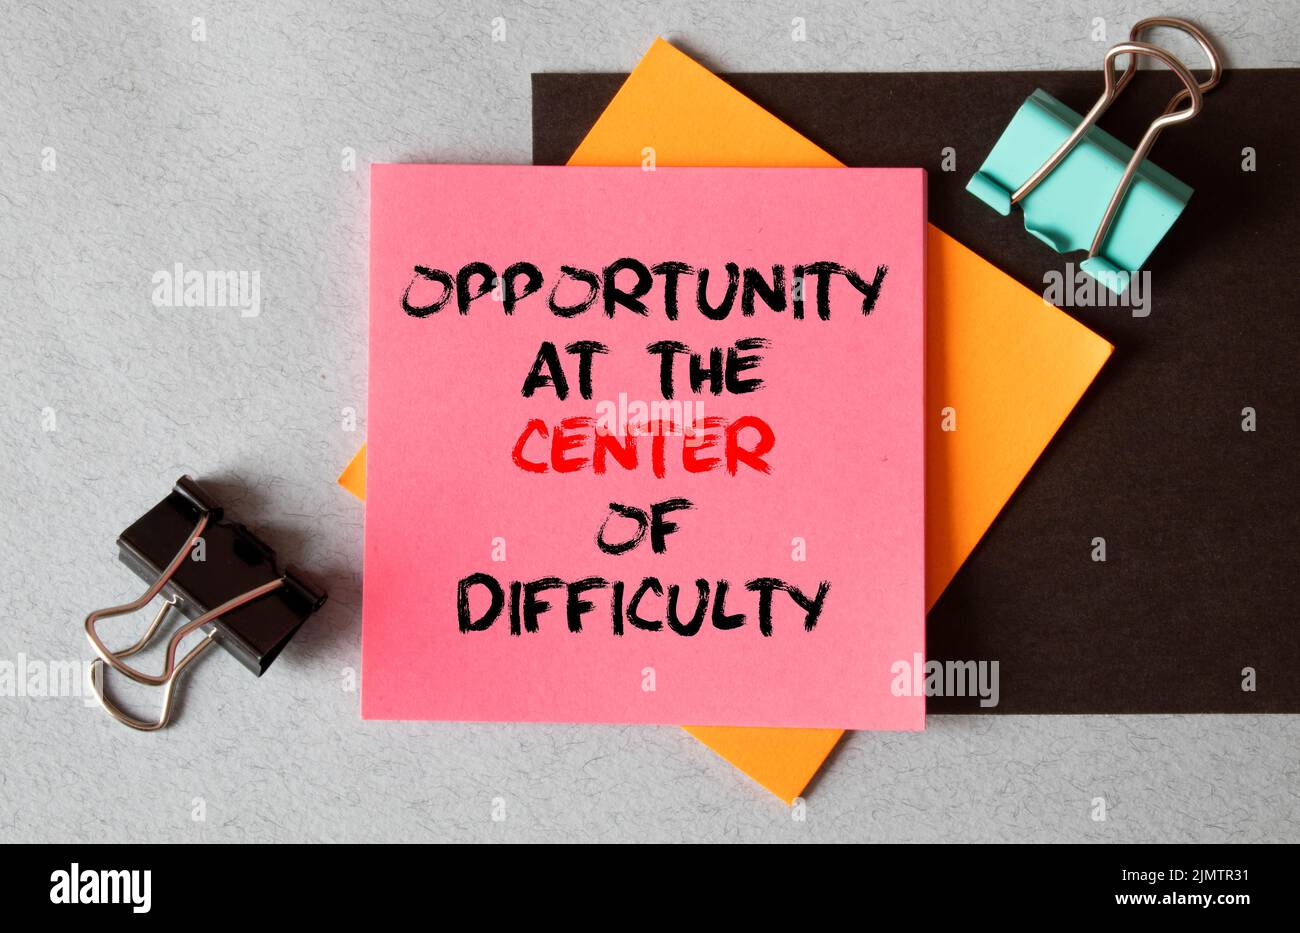 Text opportunity at the center of difficulty on the short note texture background. Stock Photo